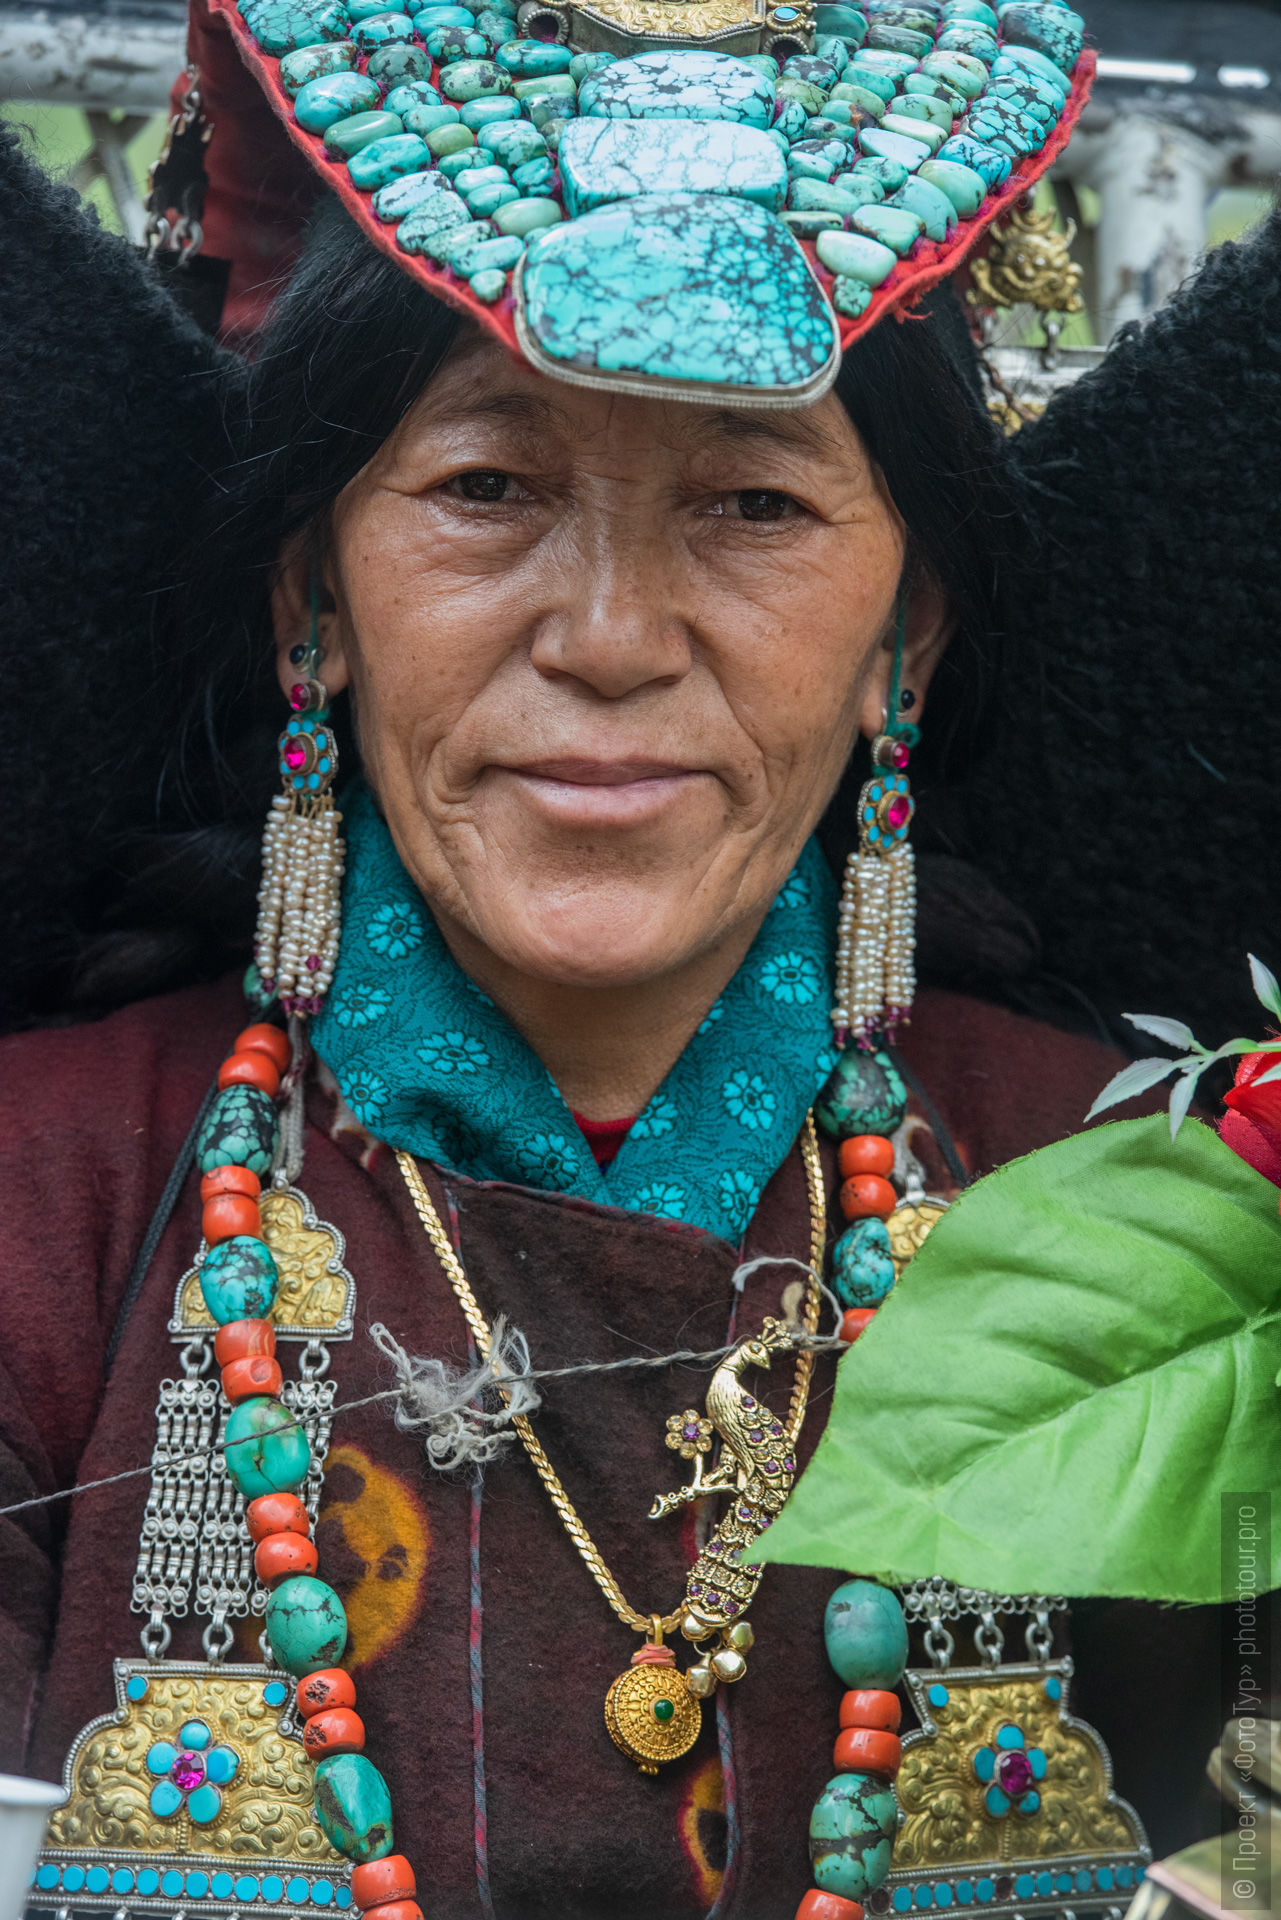 Ladakh woman in national clothes. Ladakh Tour for women, travel and acquaintance with the culture of Tibetan matriarchy.